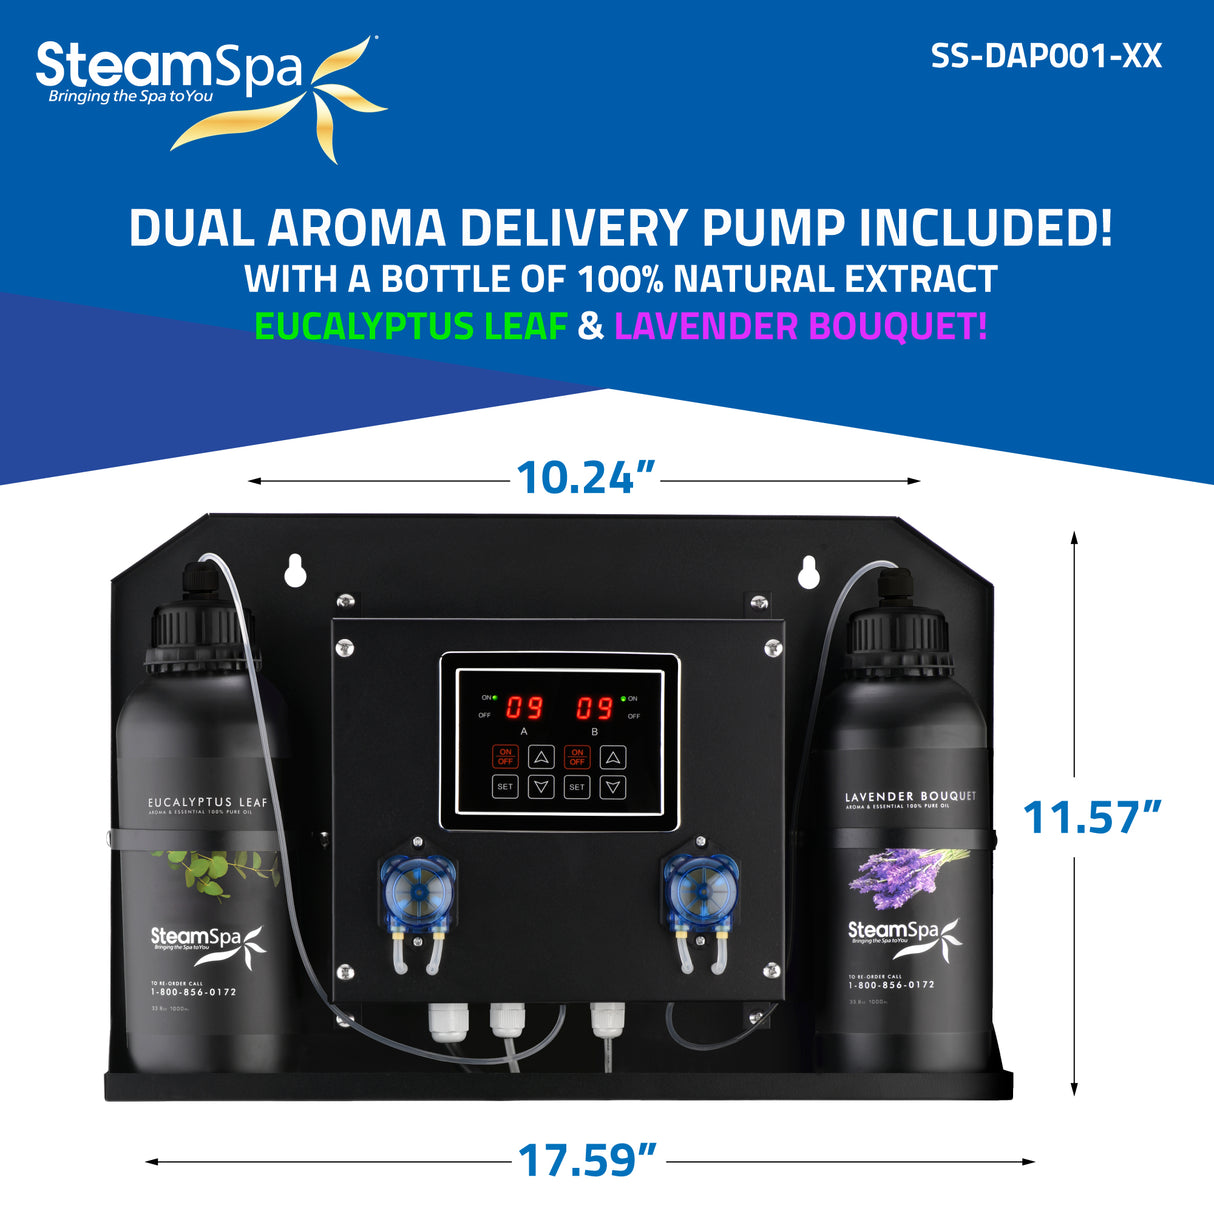 Steam Shower Generator Kit System | Polished Chrome + Self Drain Combo| Dual Bottle Aroma Oil Pump | Enclosure Steamer Sauna Spa Stall Package|Touch Screen Wifi App/Bluetooth Control Panel |12 kW Raven | RVB1200CH-ADP RVB1200CH-ADP